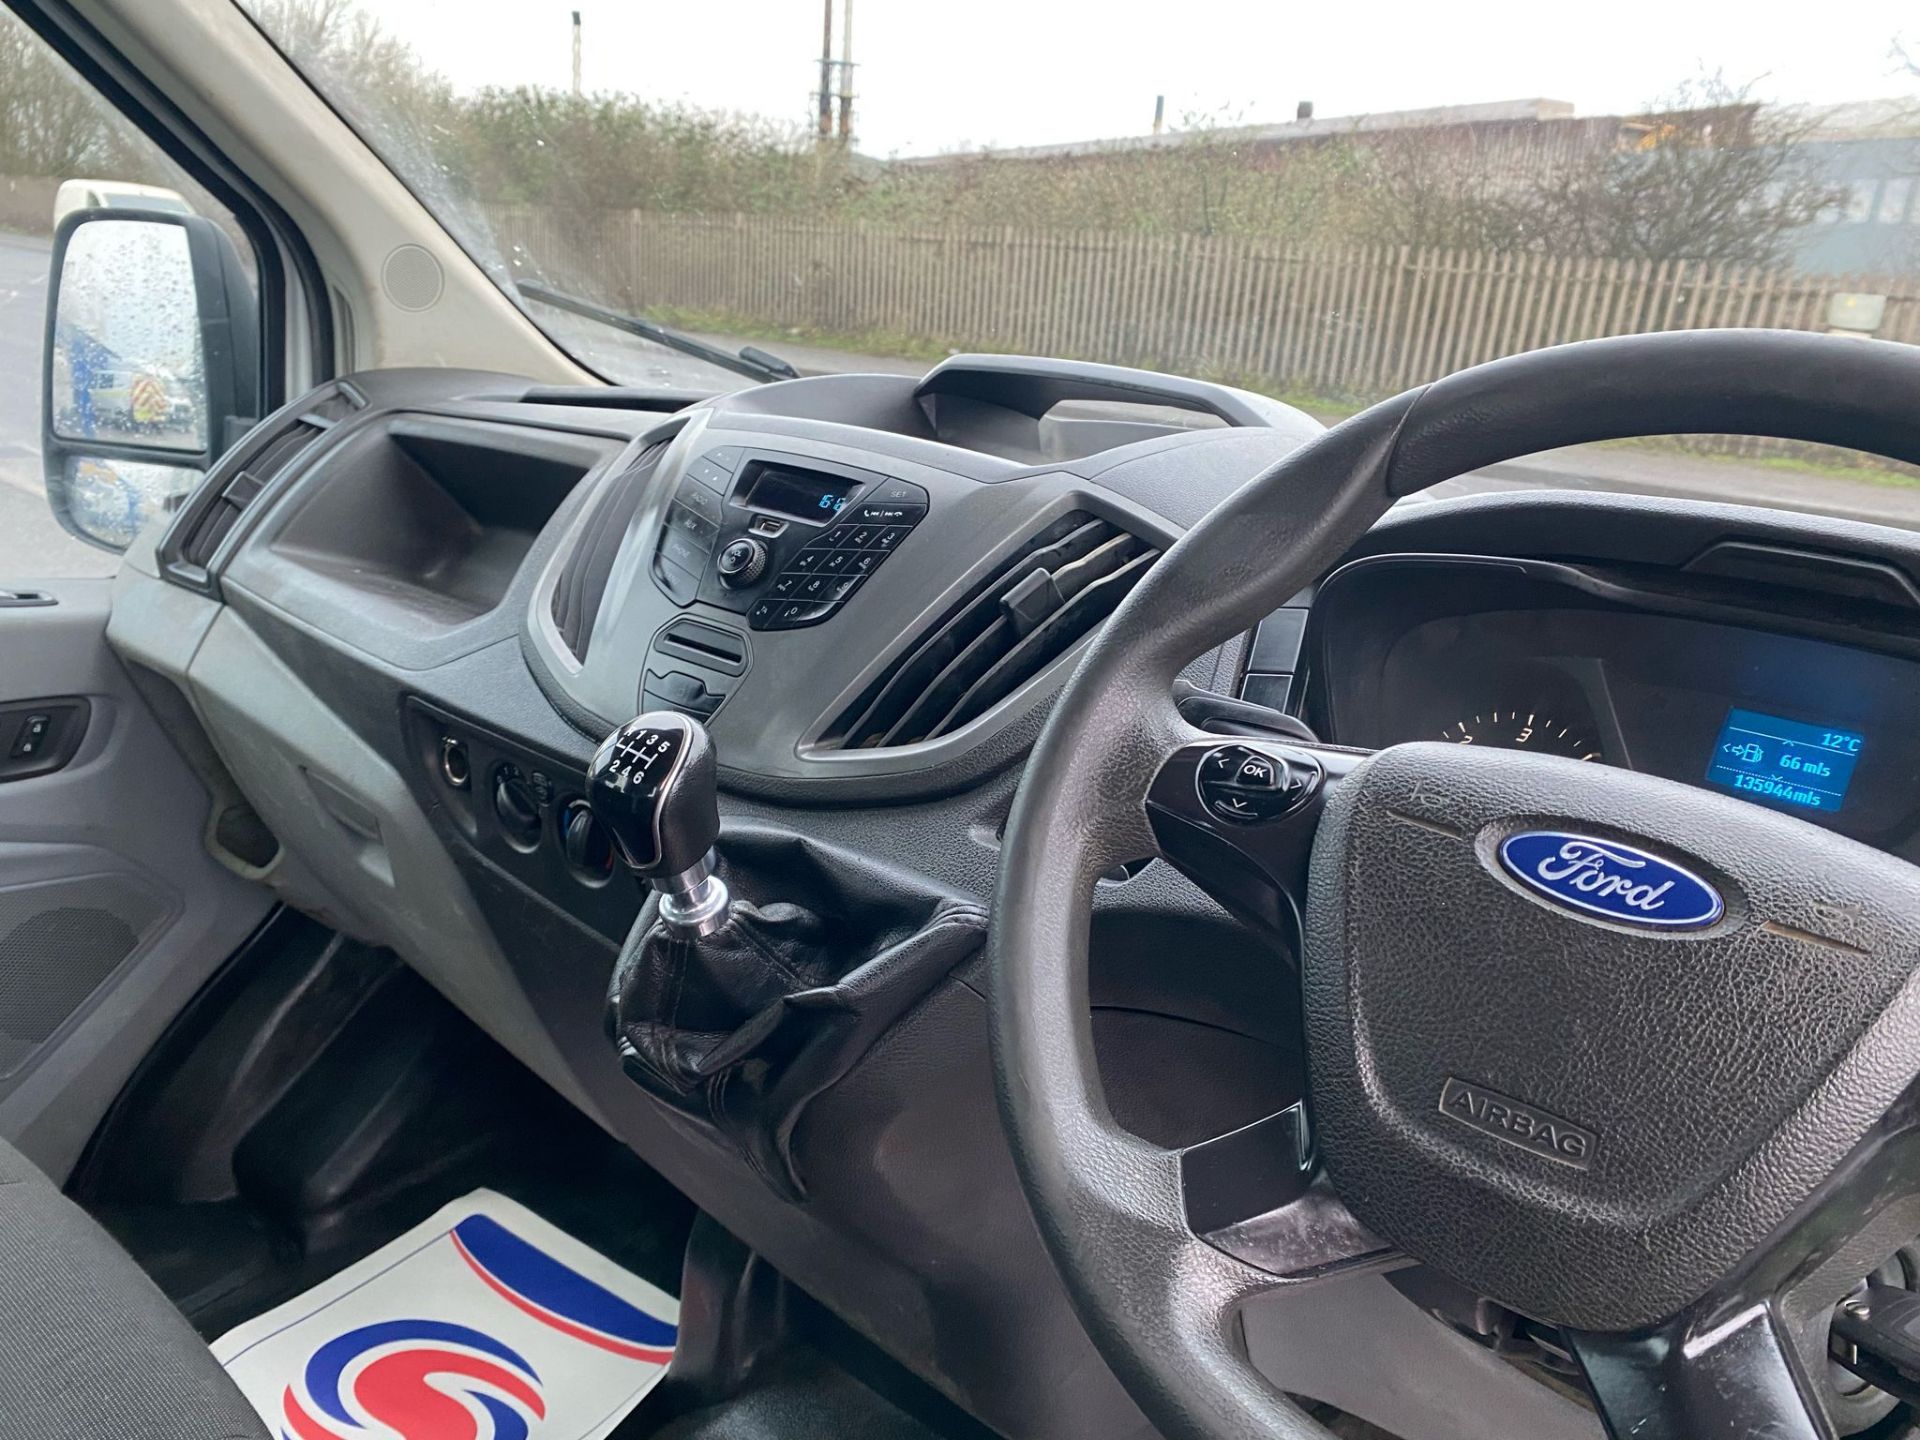 2018 18 FORD TRANSIT TIPPER - 135K MILES - EURO 6 - TWIN REAR WHEEL. - Image 8 of 10